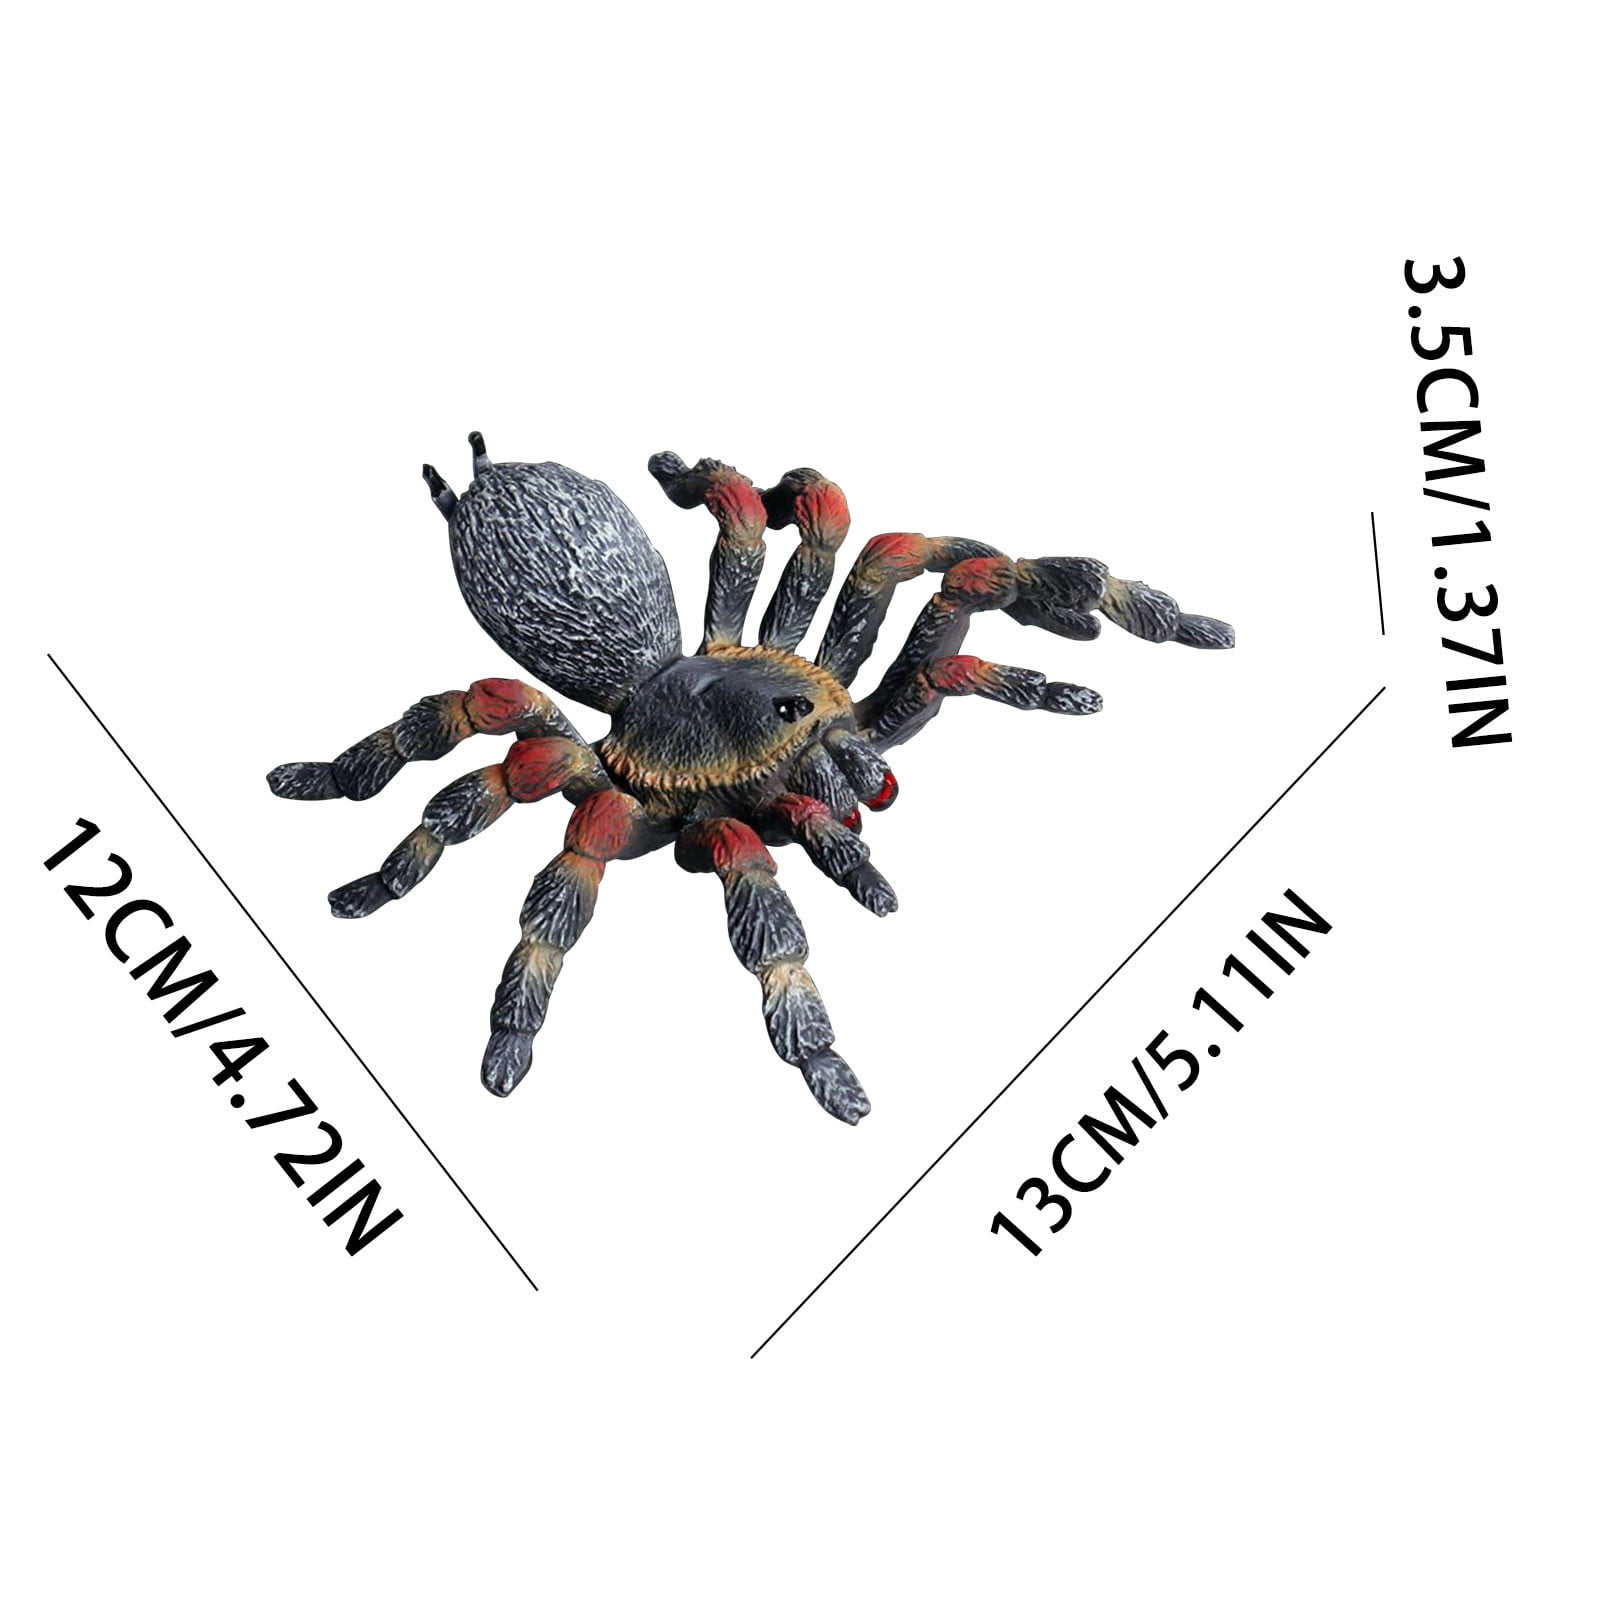 Warmtree Simulated Spider Model Realistic Spider Figurines Plastic Spider  Action Figure for Collection Science Educational, Set of 4